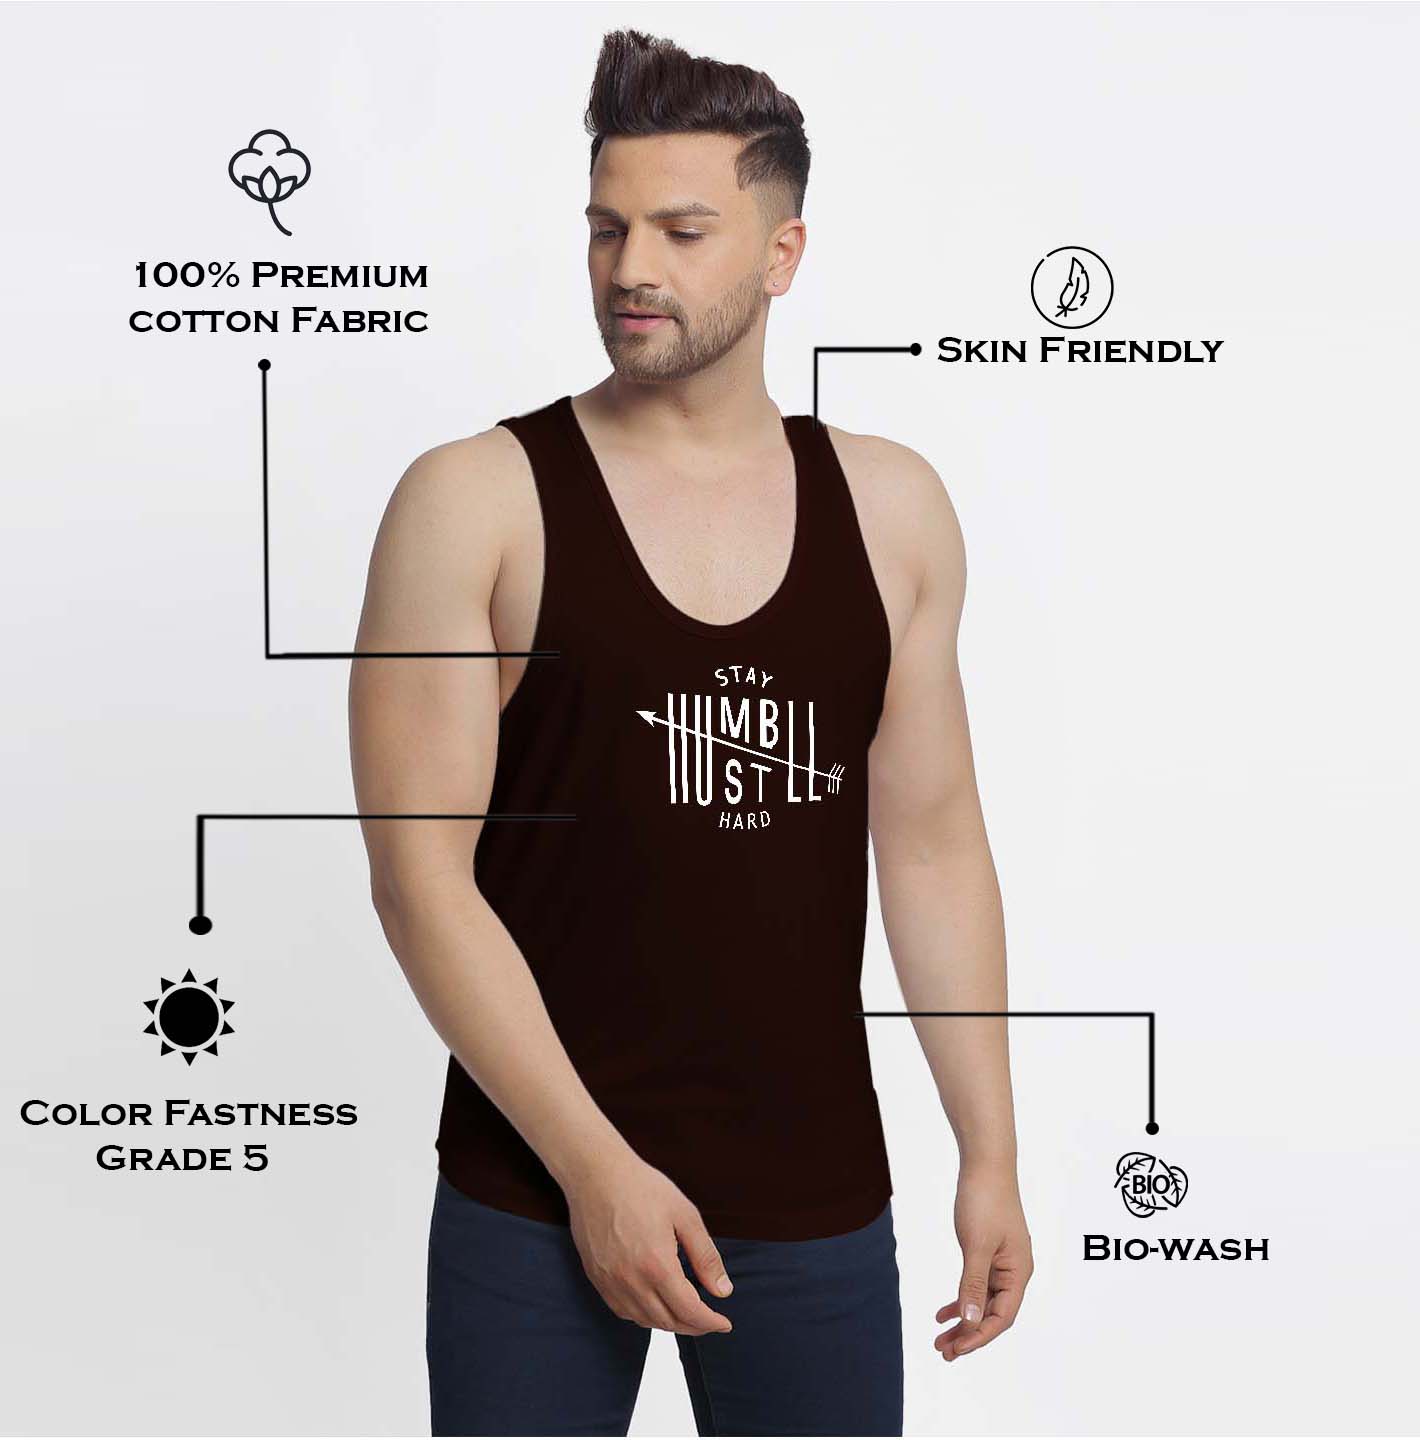 Mens's Stay Humble Printed Innerwear Gym Vest - Friskers